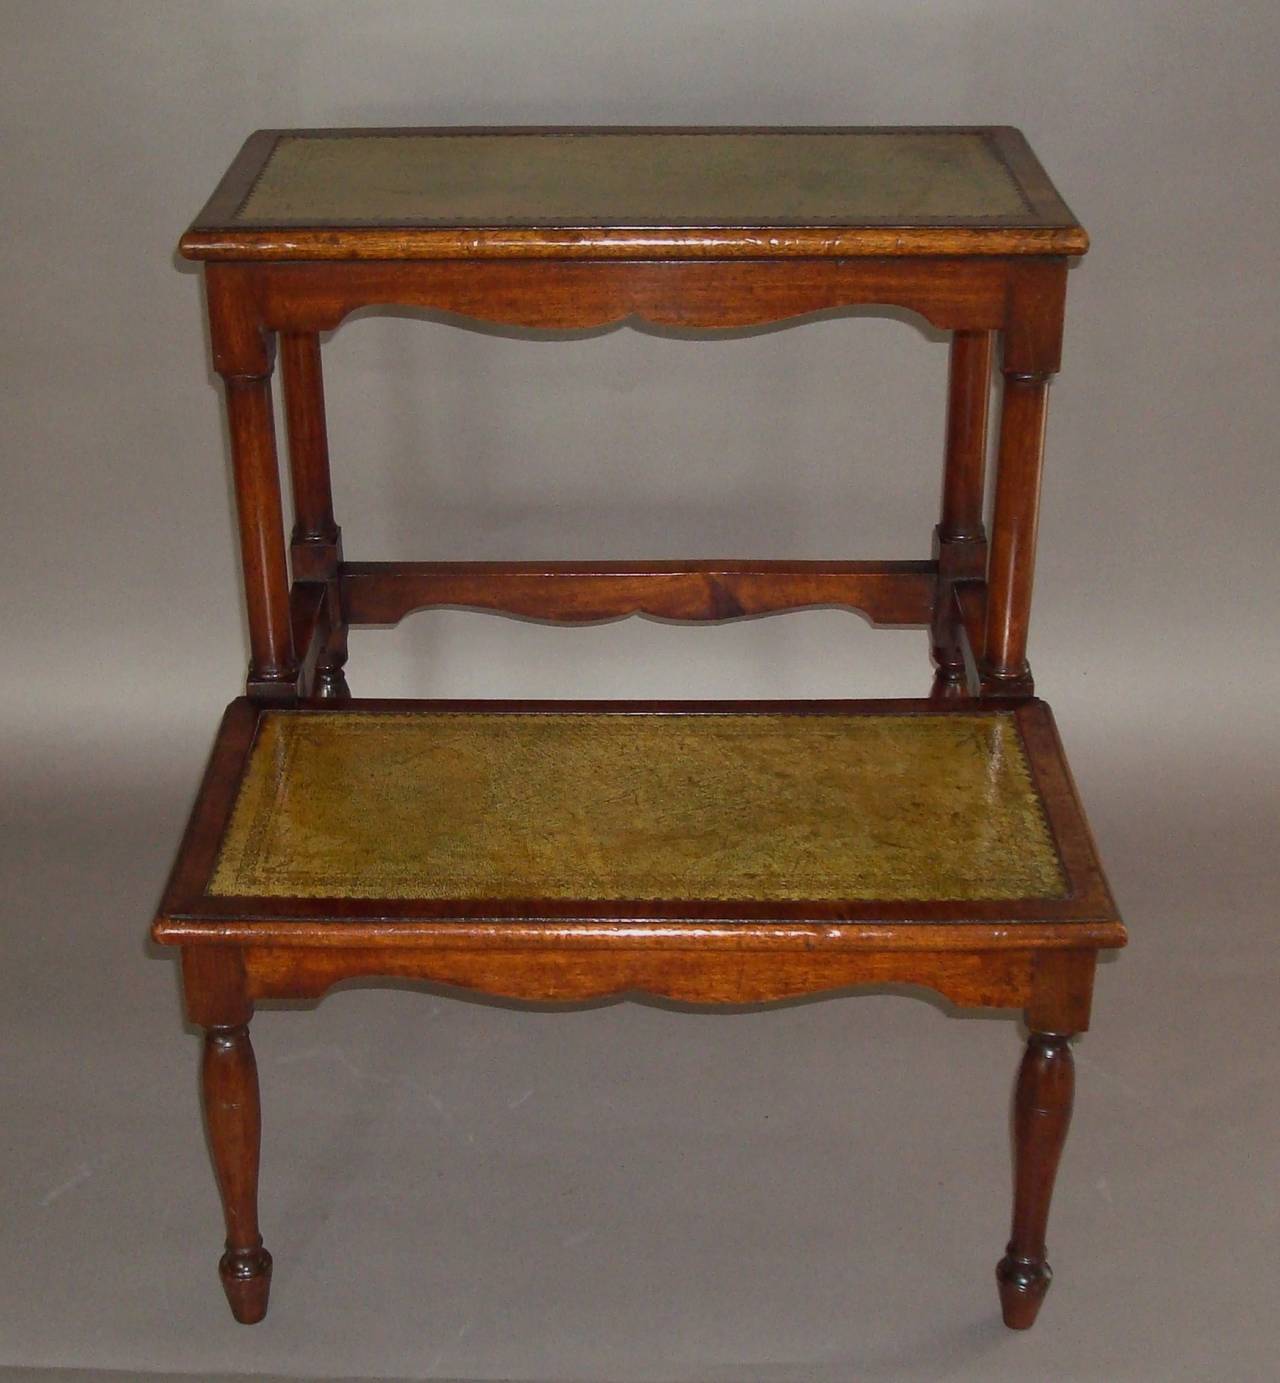 A good Regency set of mahogany library steps of elegant proportions, the two treads with a moulded edge and narrow mahogany cross banding inset with olive green leather with gilt tooled borders.  The top tread supported on turned columns and shaped